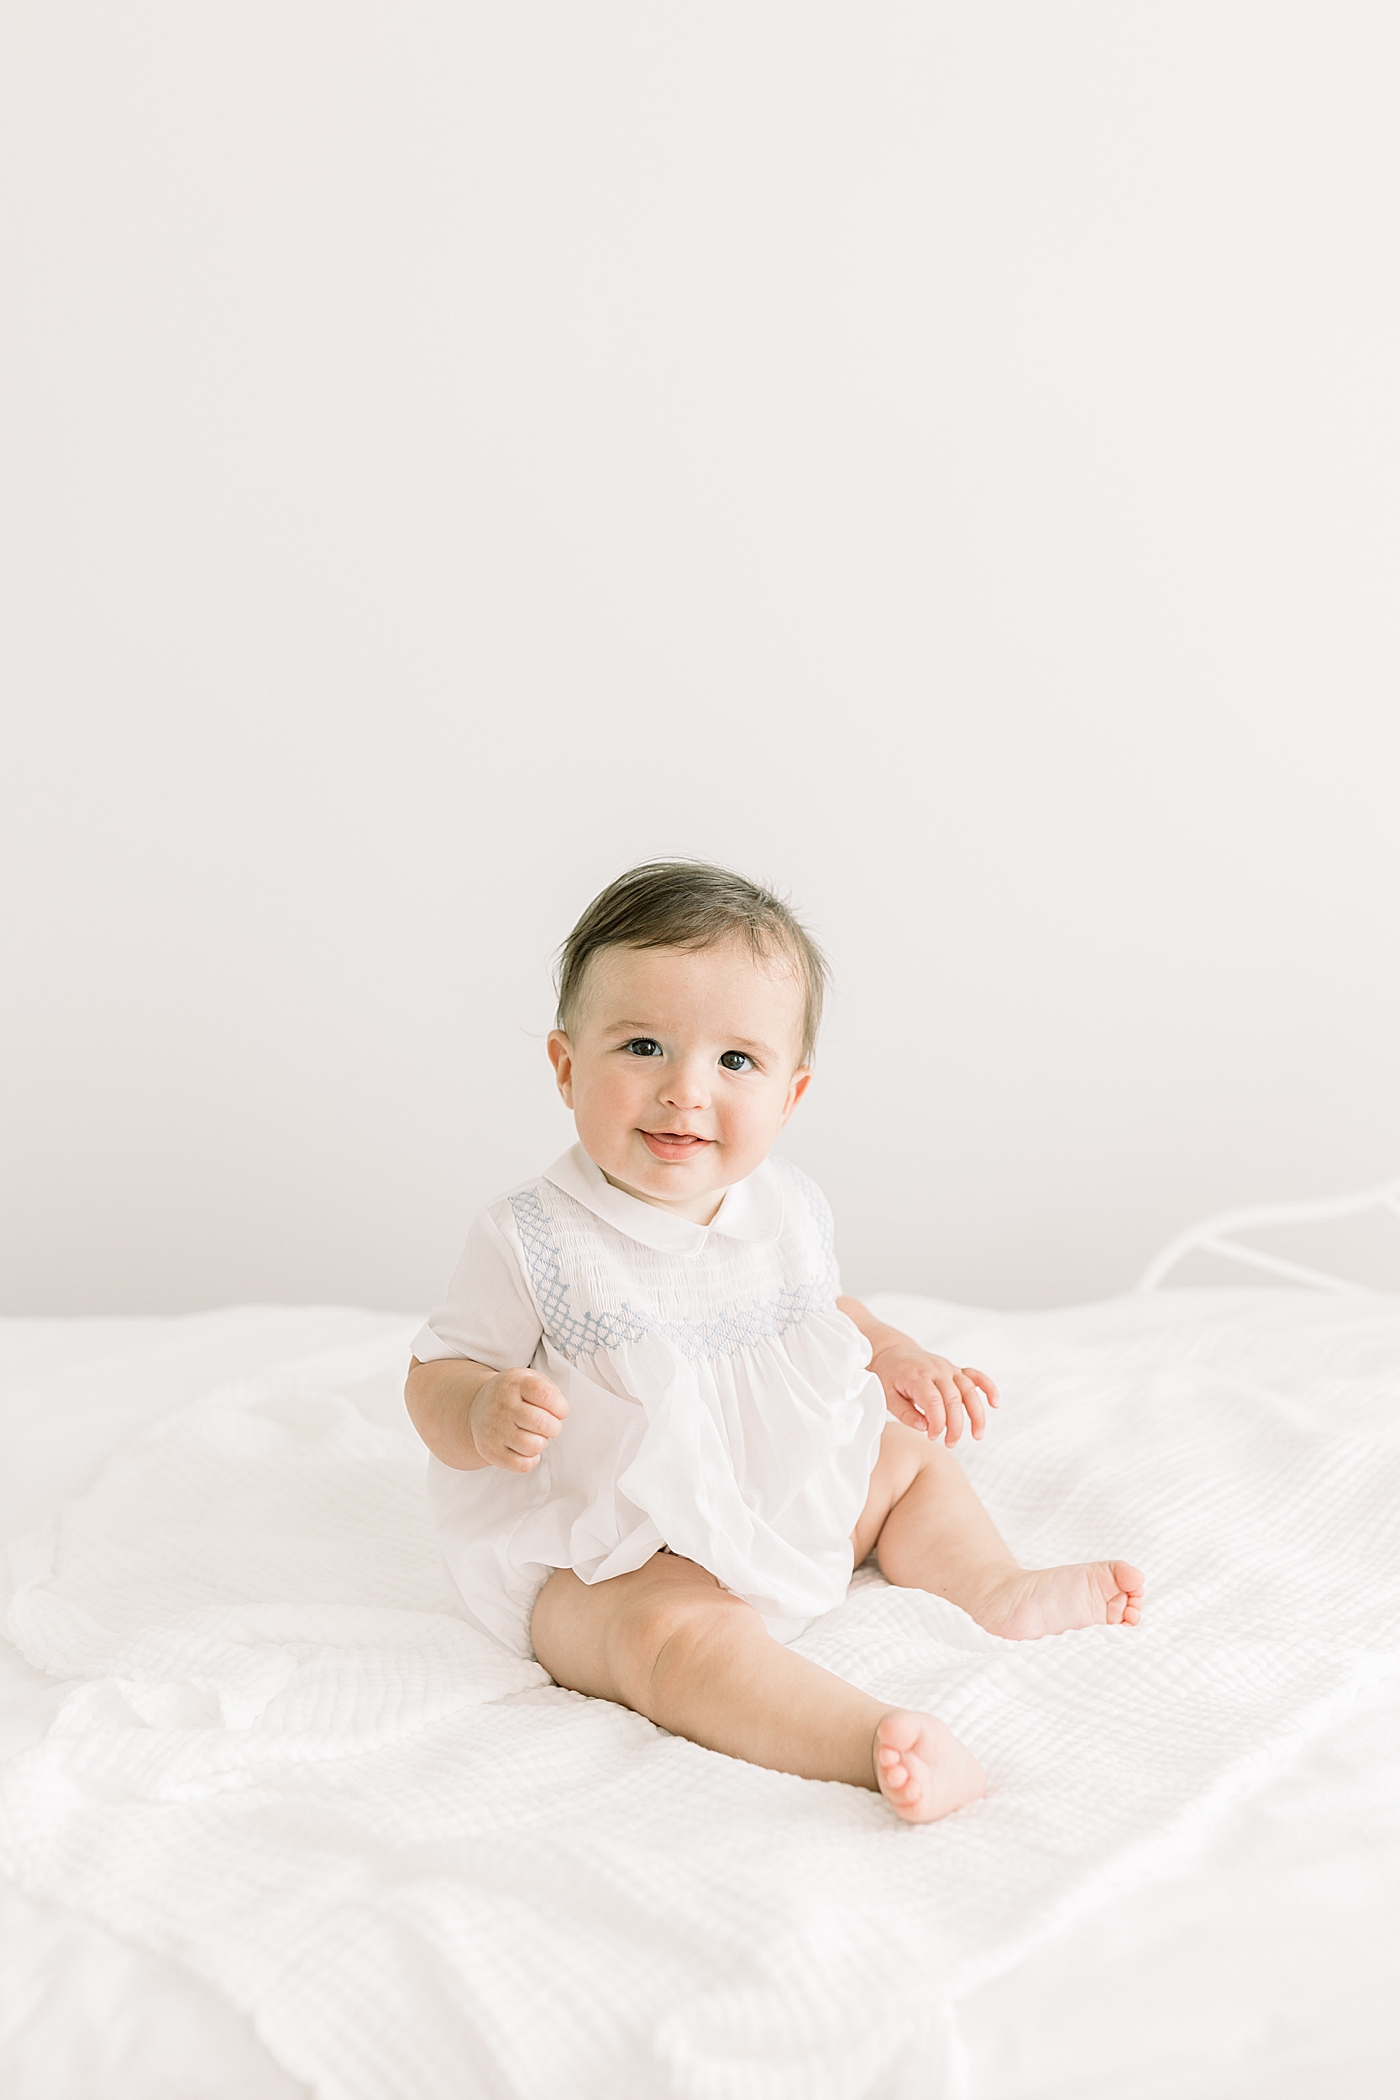 Baby sitting up and looking at the camera in a softly lit room during Studio Milestone Session | Images by Caitlyn Motycka